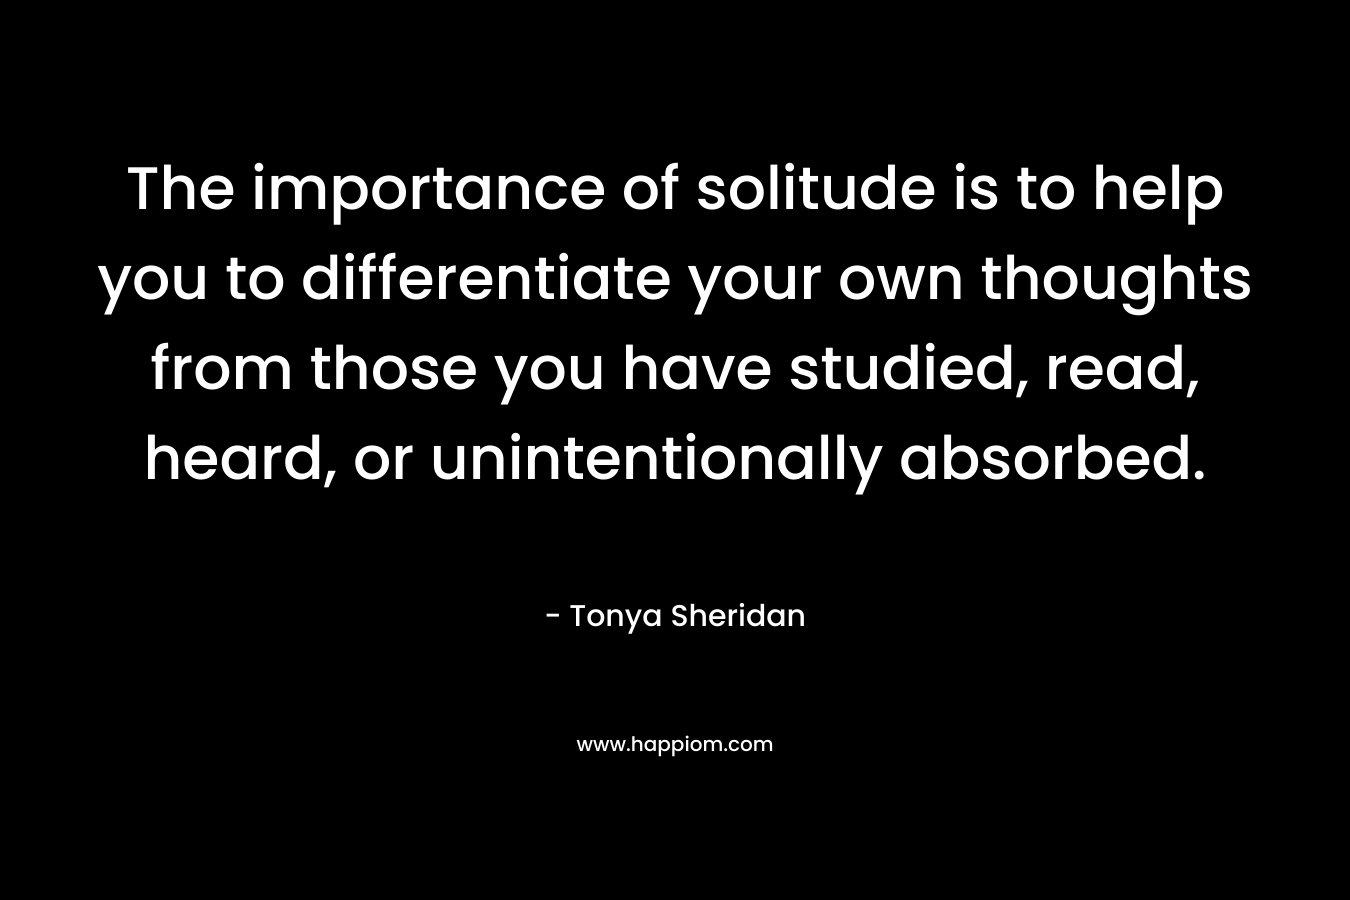 The importance of solitude is to help you to differentiate your own thoughts from those you have studied, read, heard, or unintentionally absorbed.